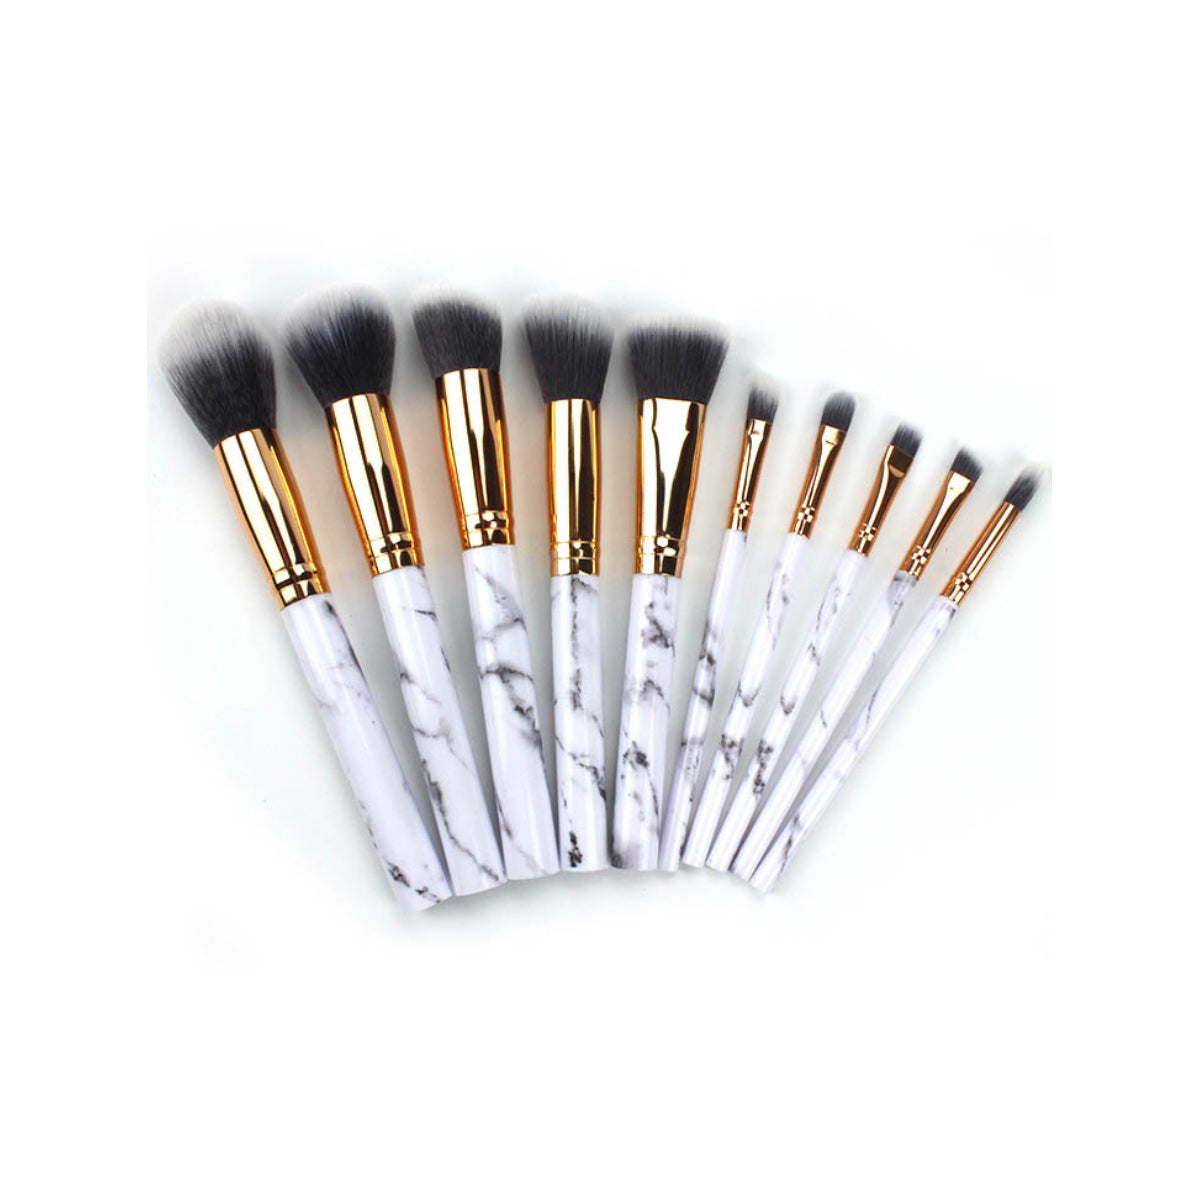 La Canica 10 In 1 Makeup Brush Set With Travel Friendly Container